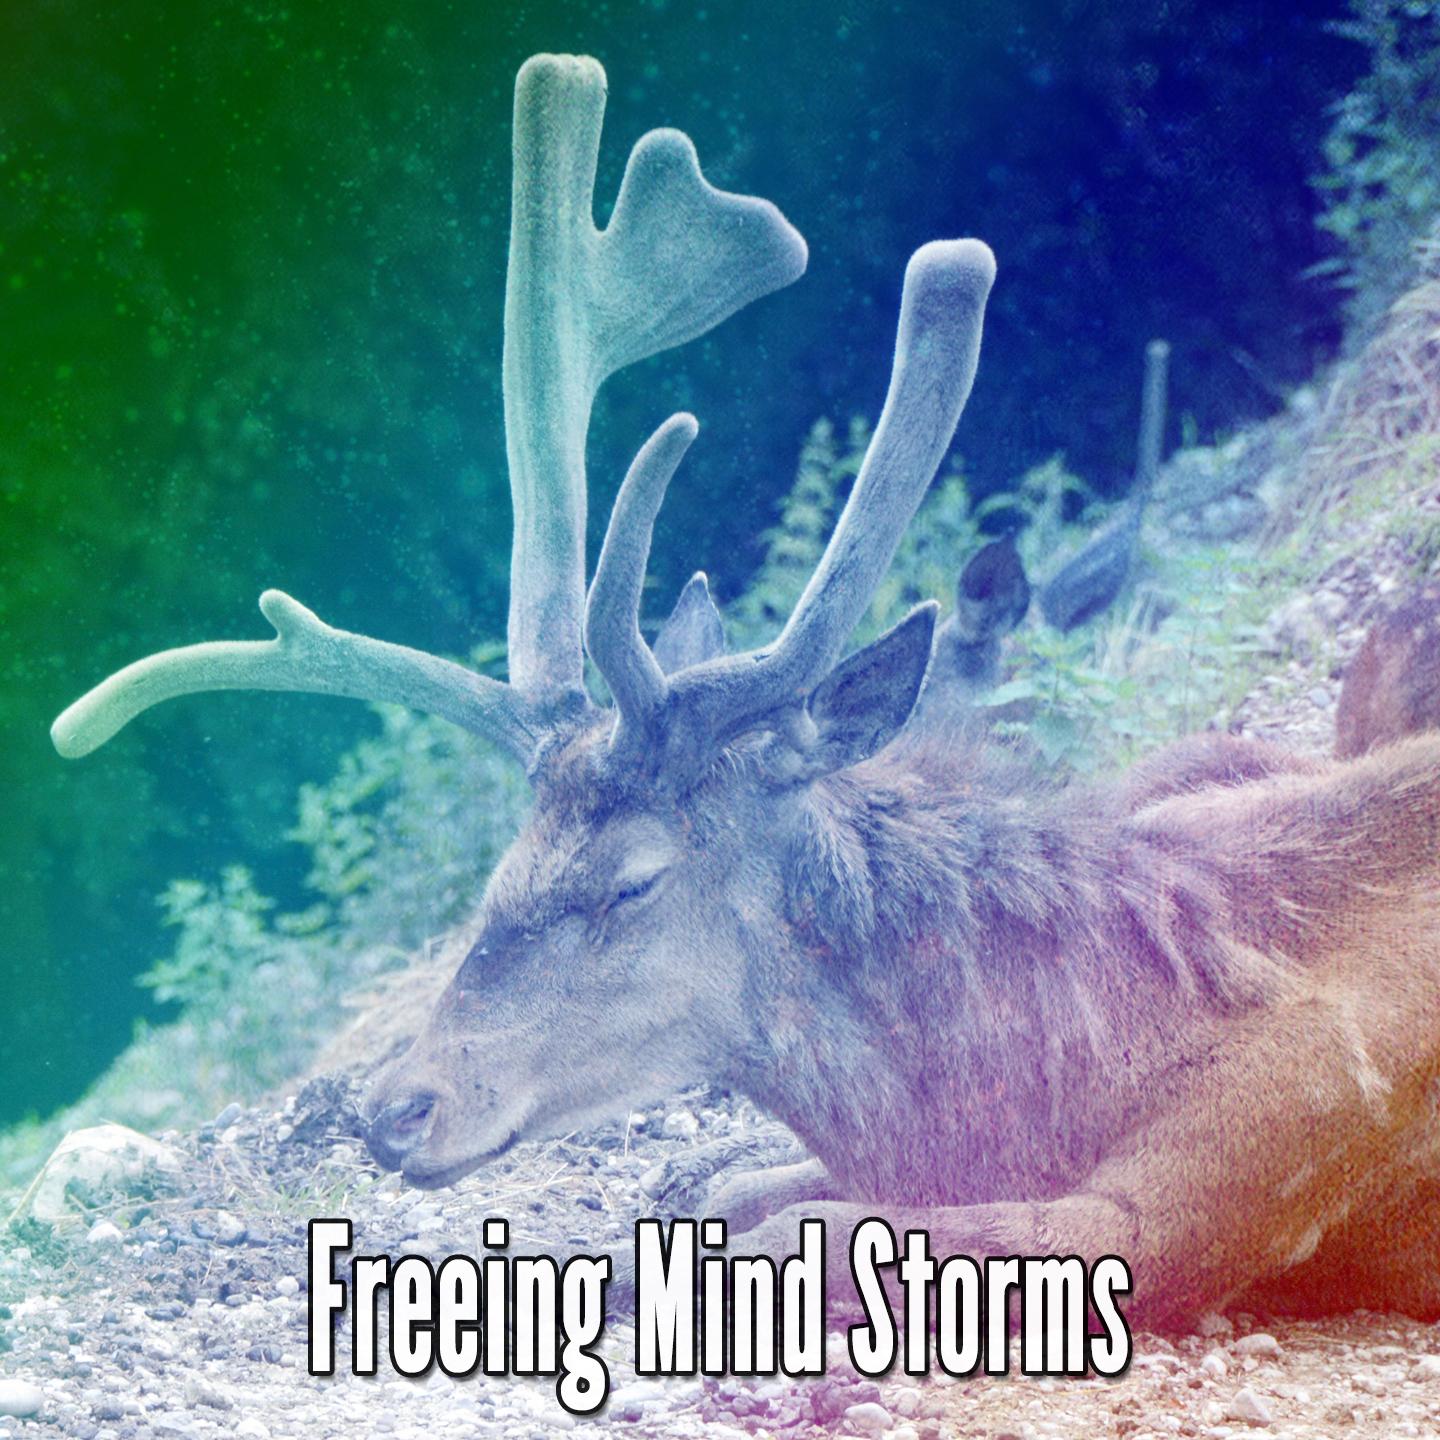 Freeing Mind Storms